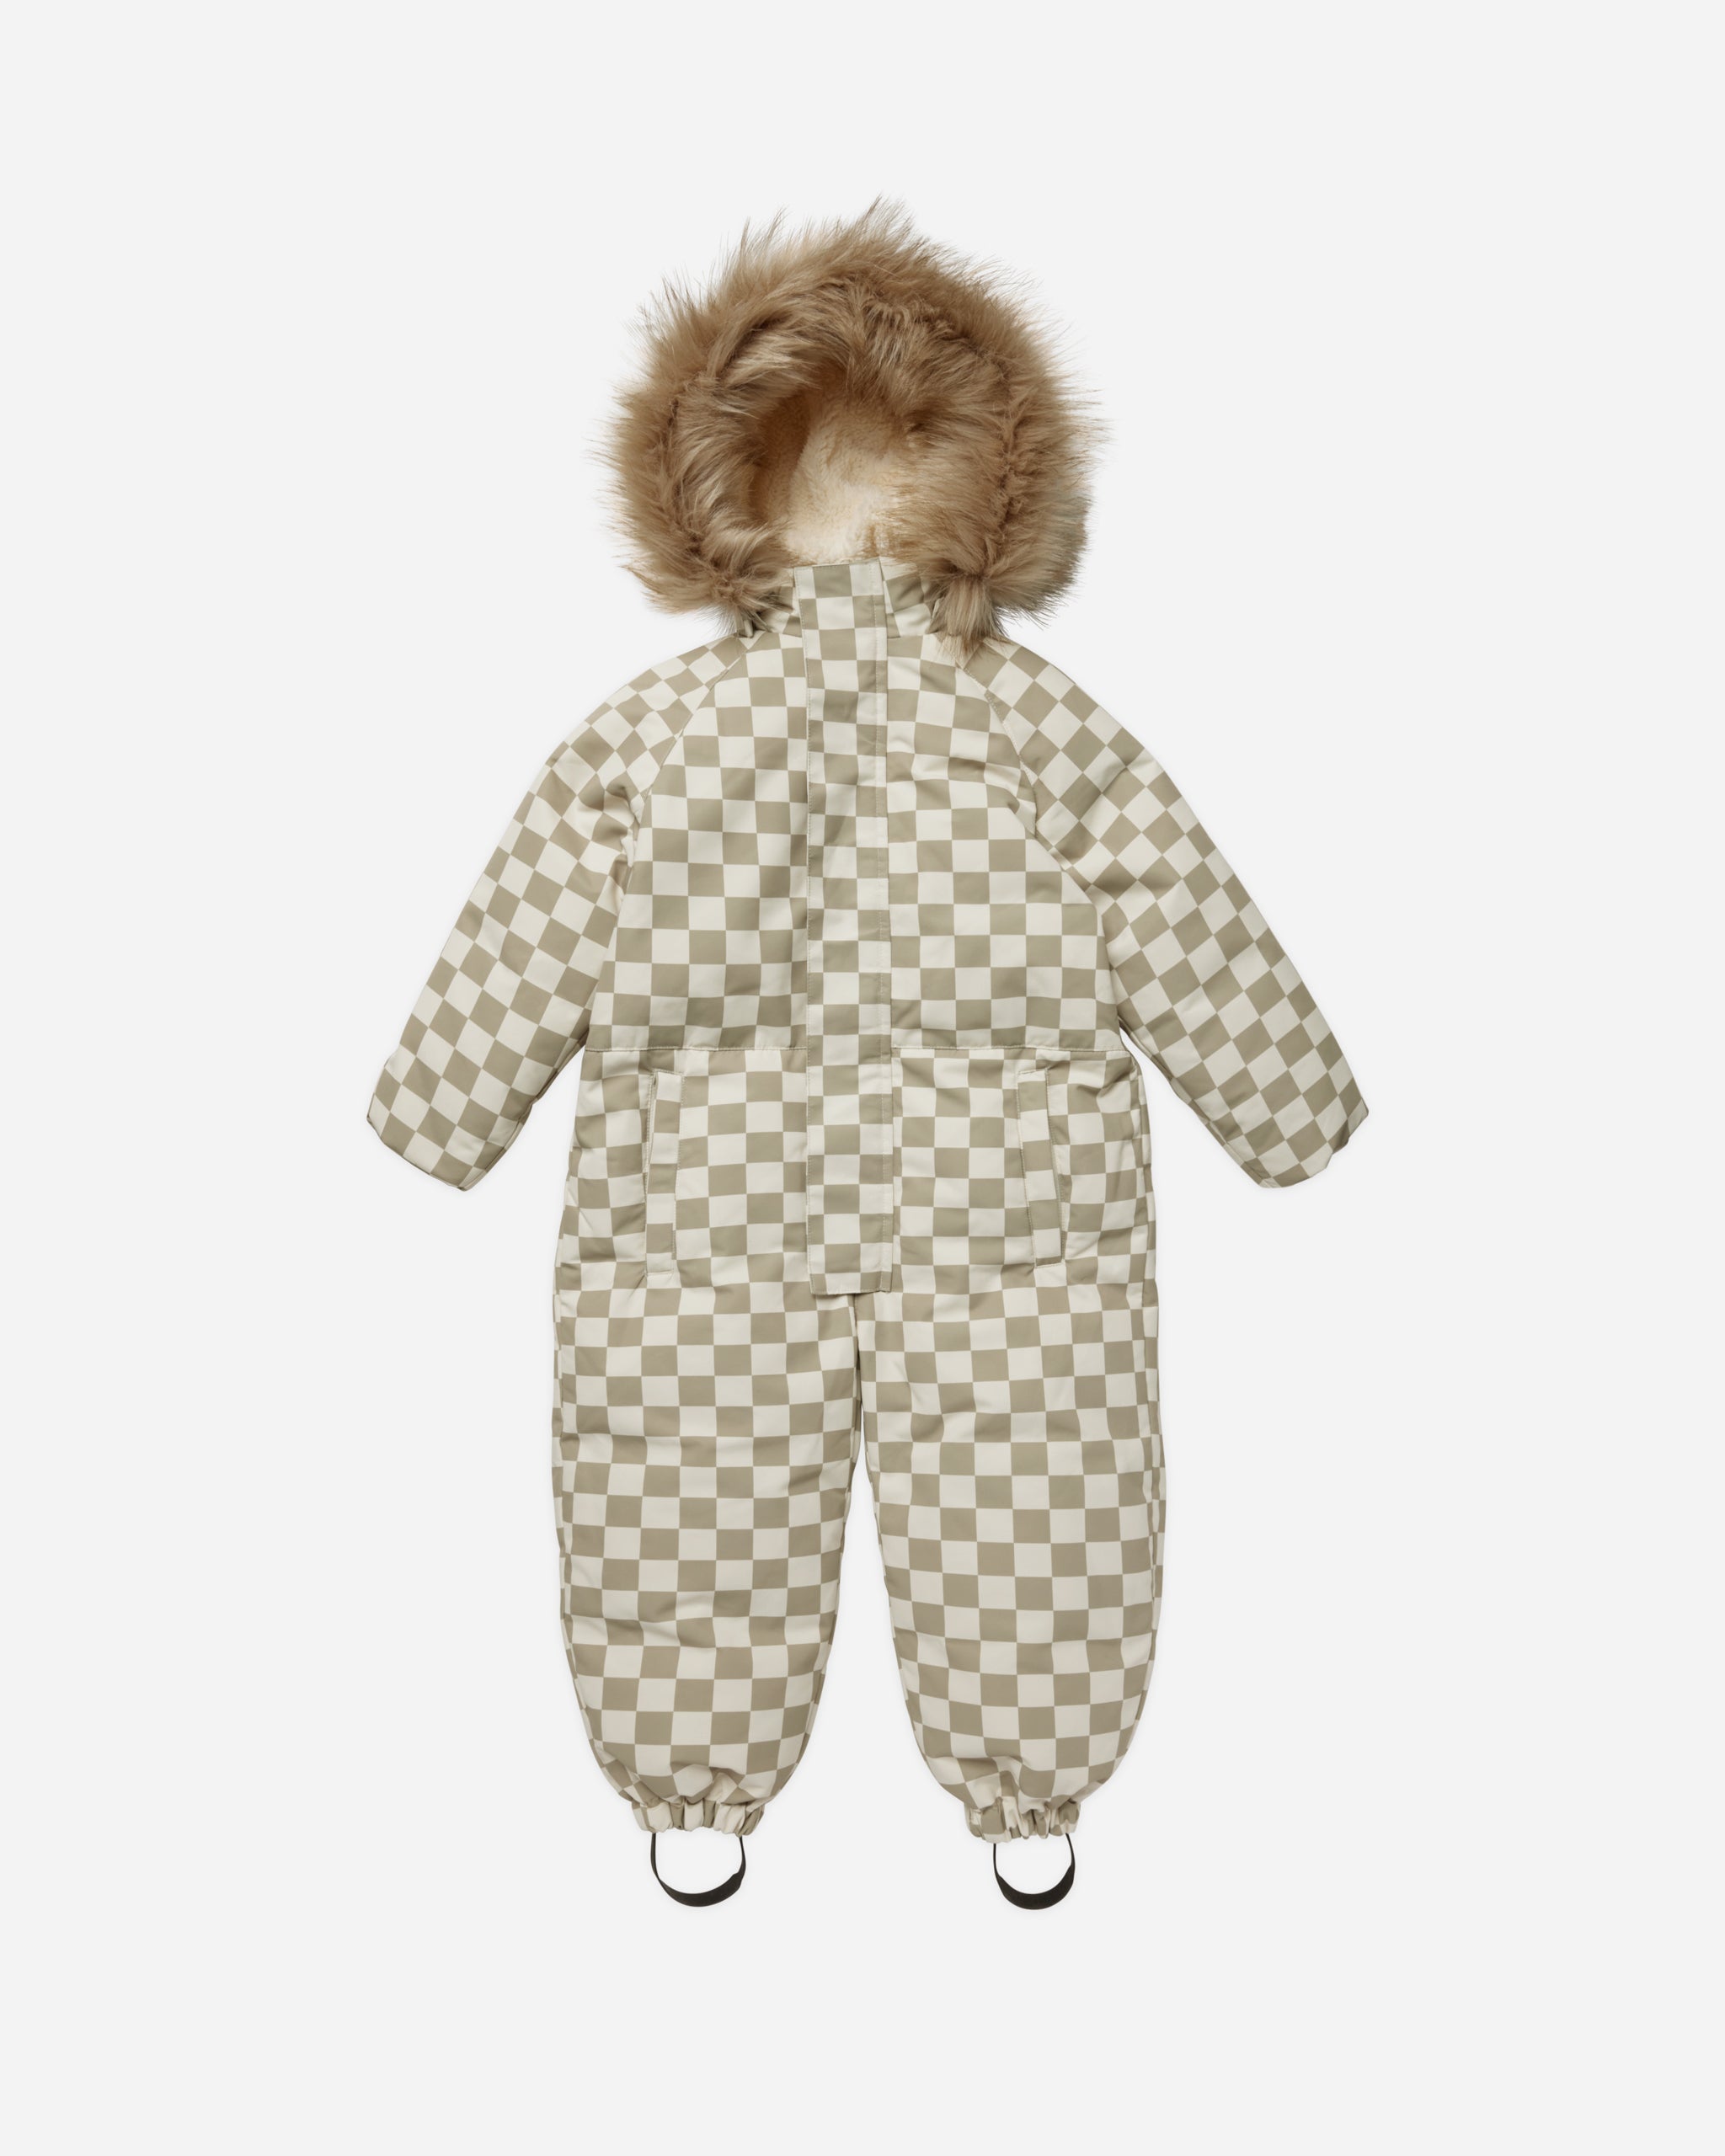 Ski Snowsuit | Fern Check - Rylee + Cru | Kids Clothes | Trendy Baby Clothes | Modern Infant Outfits |